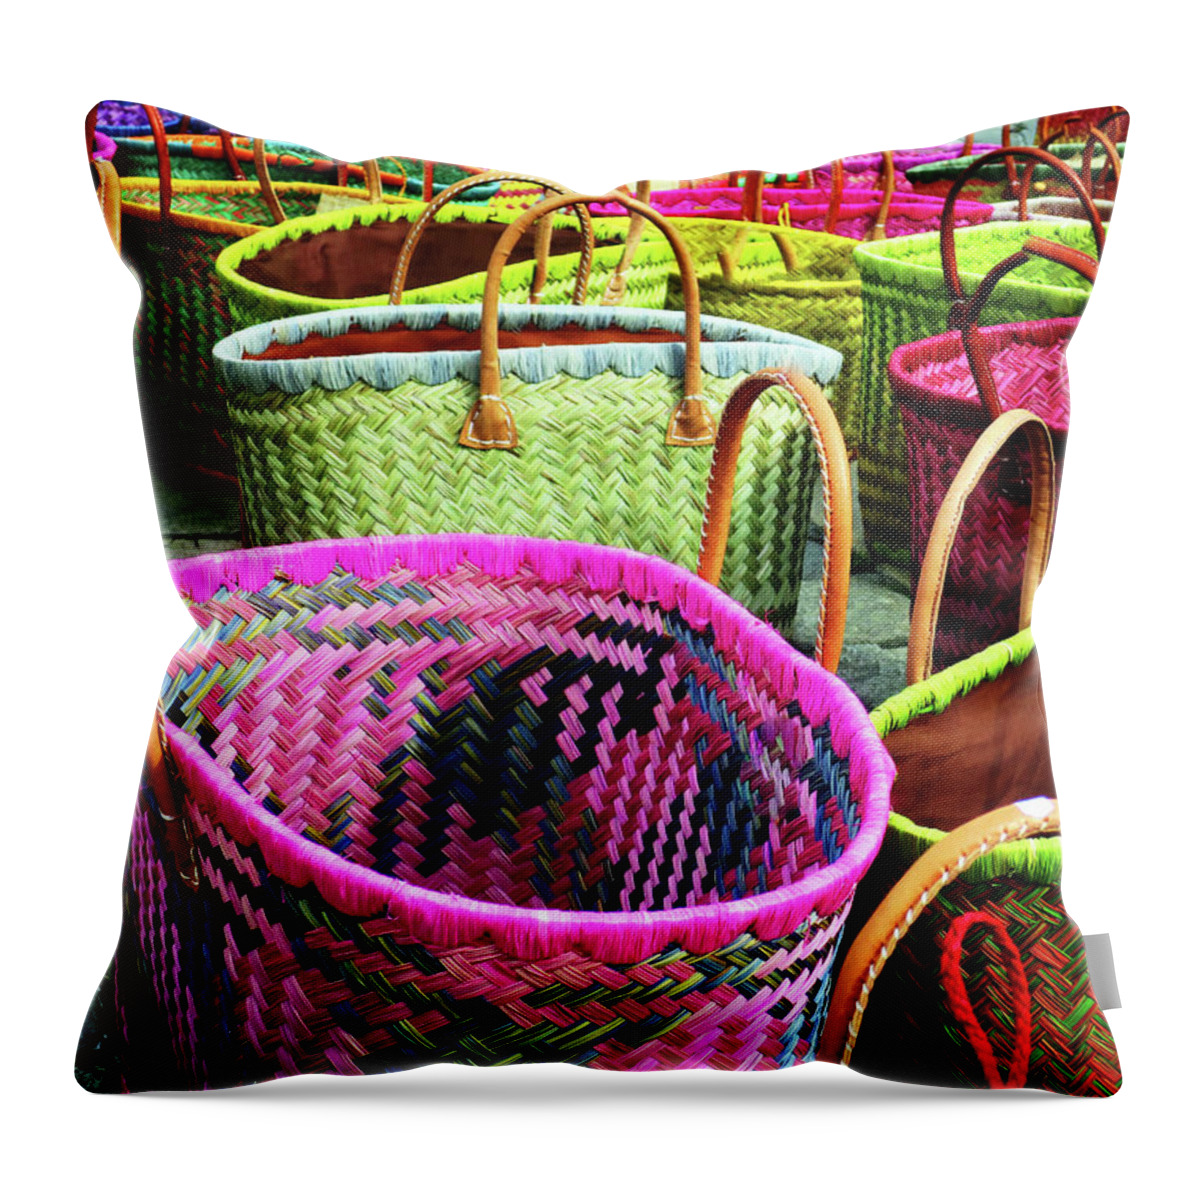 Baskets Throw Pillow featuring the photograph Market Baskets - Libourne by Rick Locke - Out of the Corner of My Eye